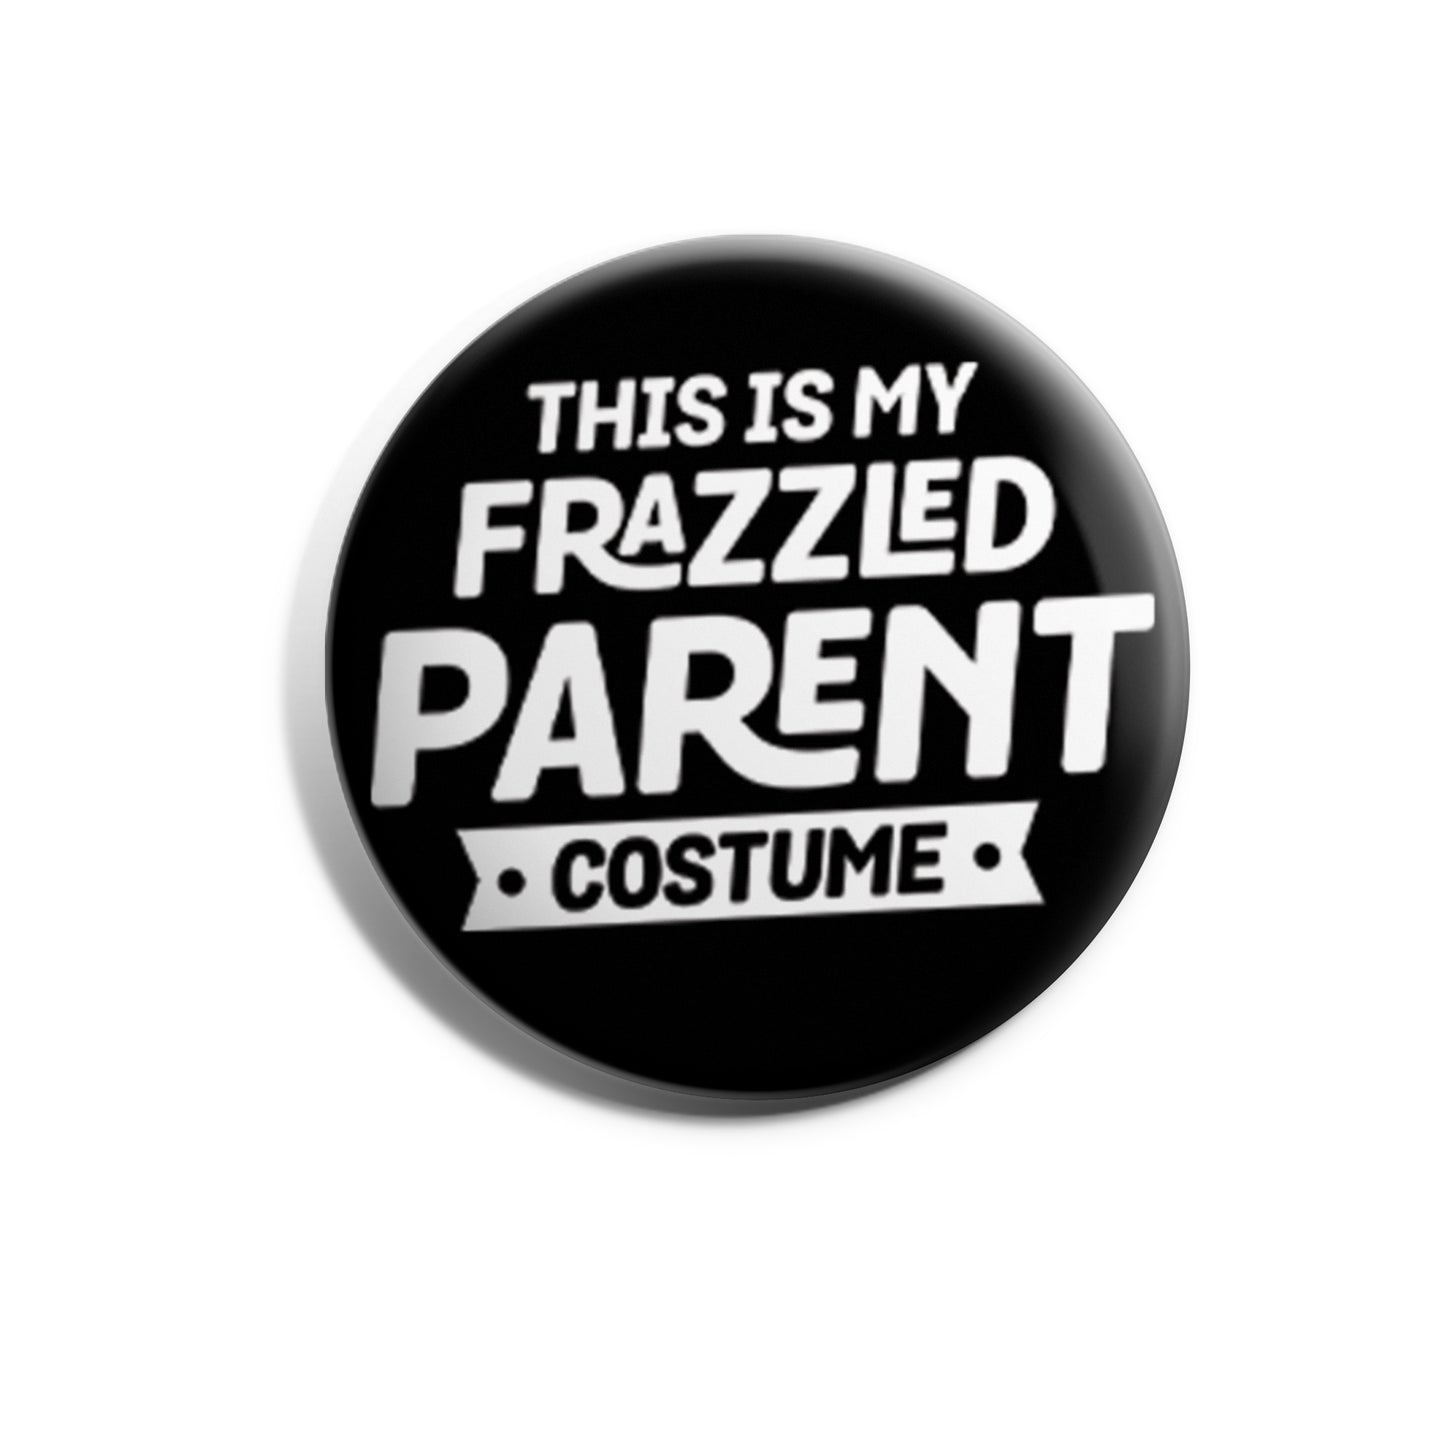 This is my Frazzled Parent Costume